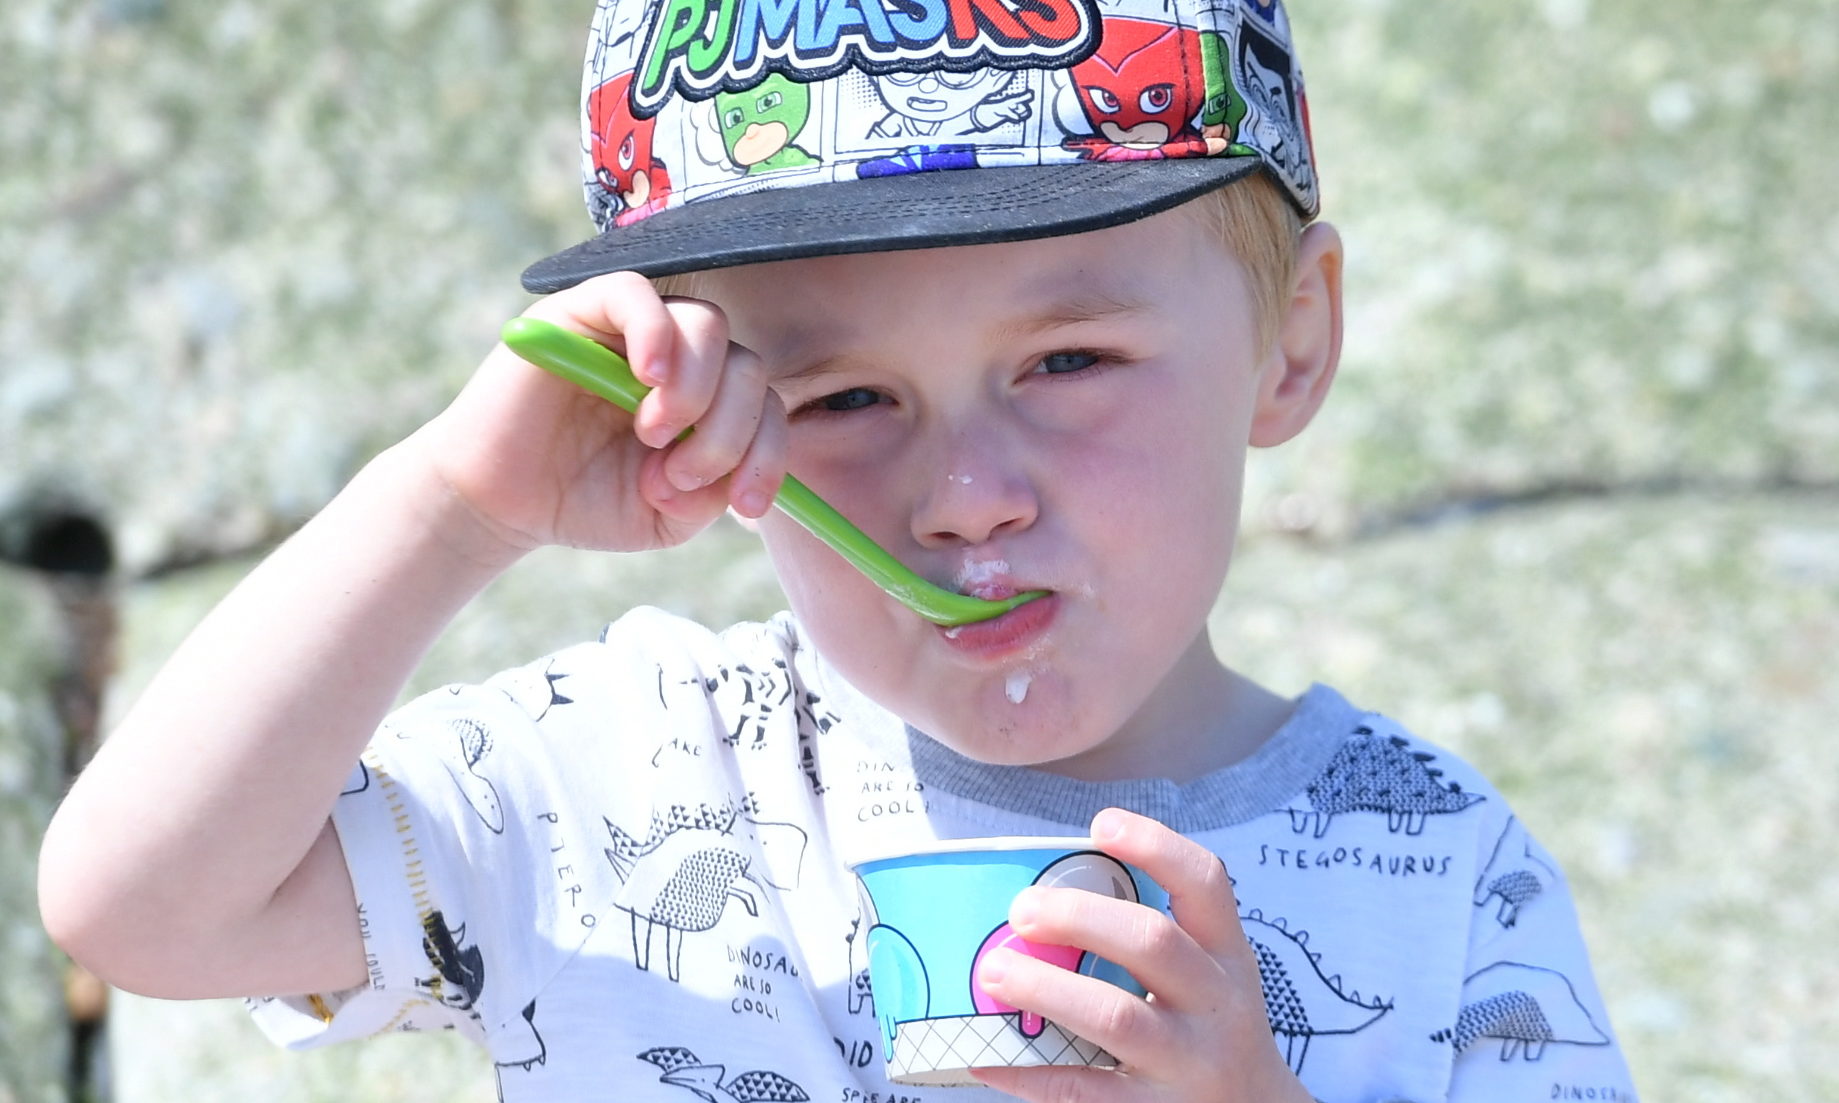 Three-year-old Charlie Shearer tucks into some ice-cream at Aberdeen beach. Photo by Chris Sumner